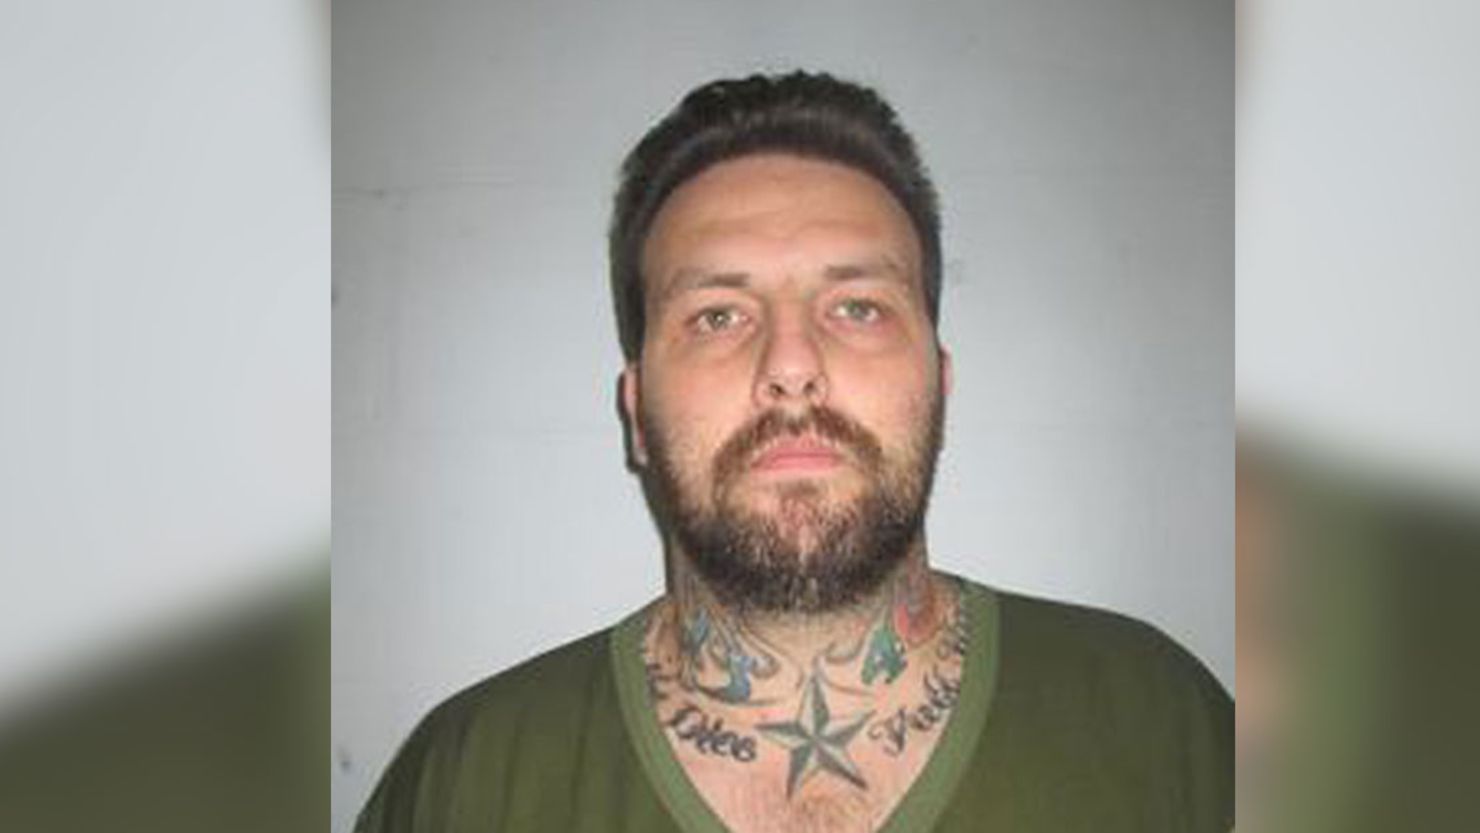 Police are warning people not to approach 34-year-old Zlatko Sikorsky.